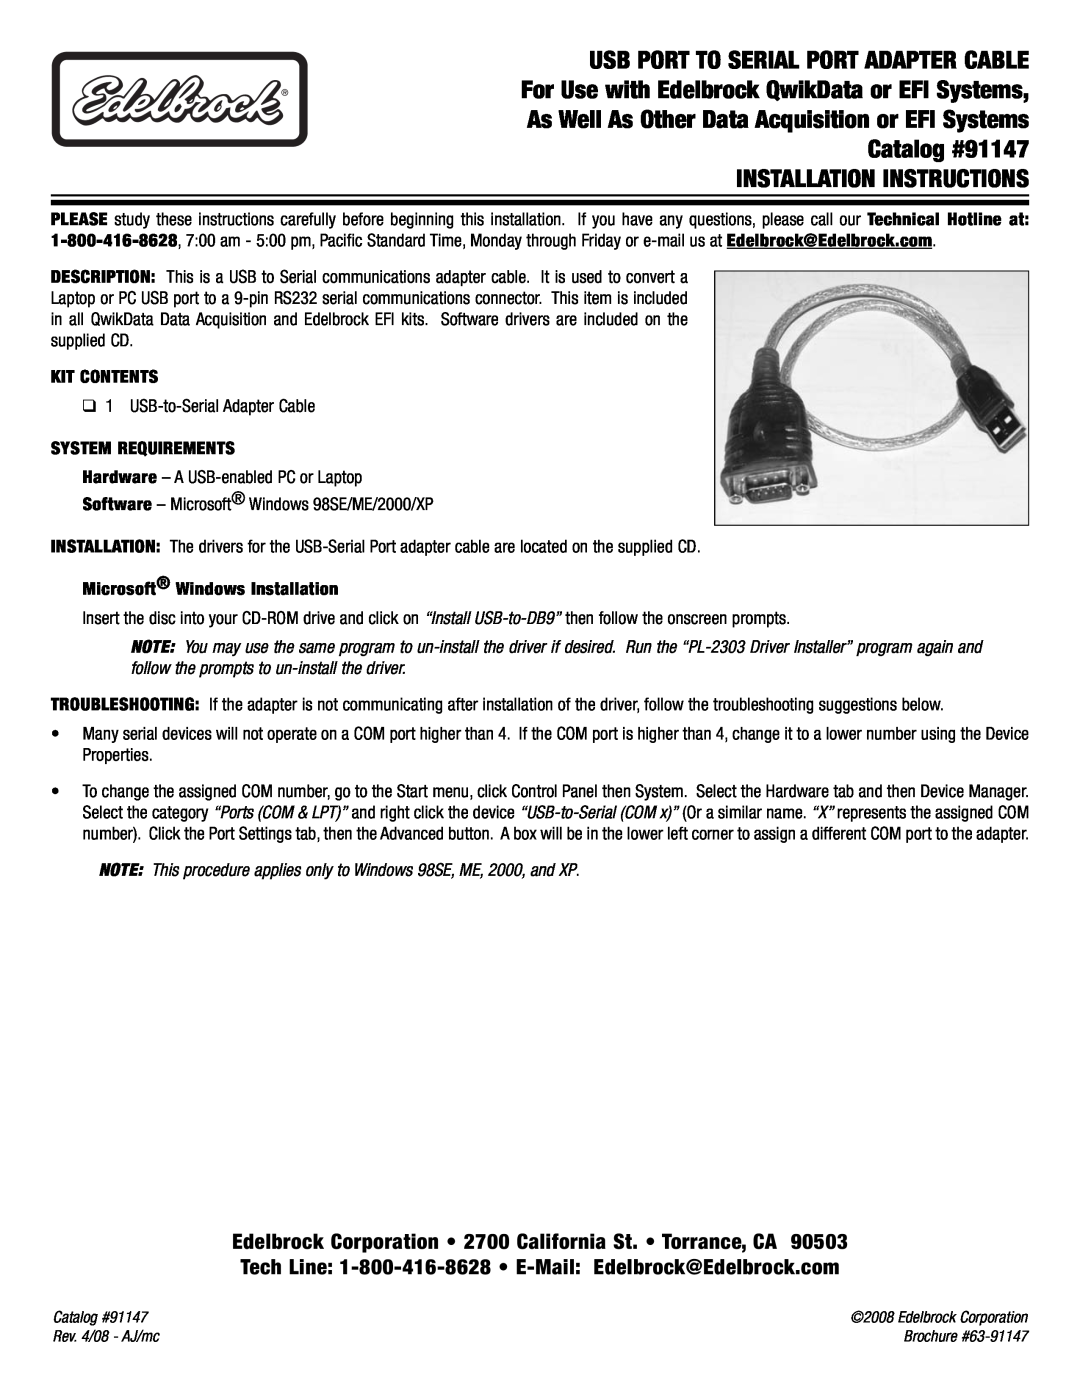 Edelbrock 91147 brochure Installation Instructions, Usb Port To Serial Port Adapter Cable, Kit Contents 